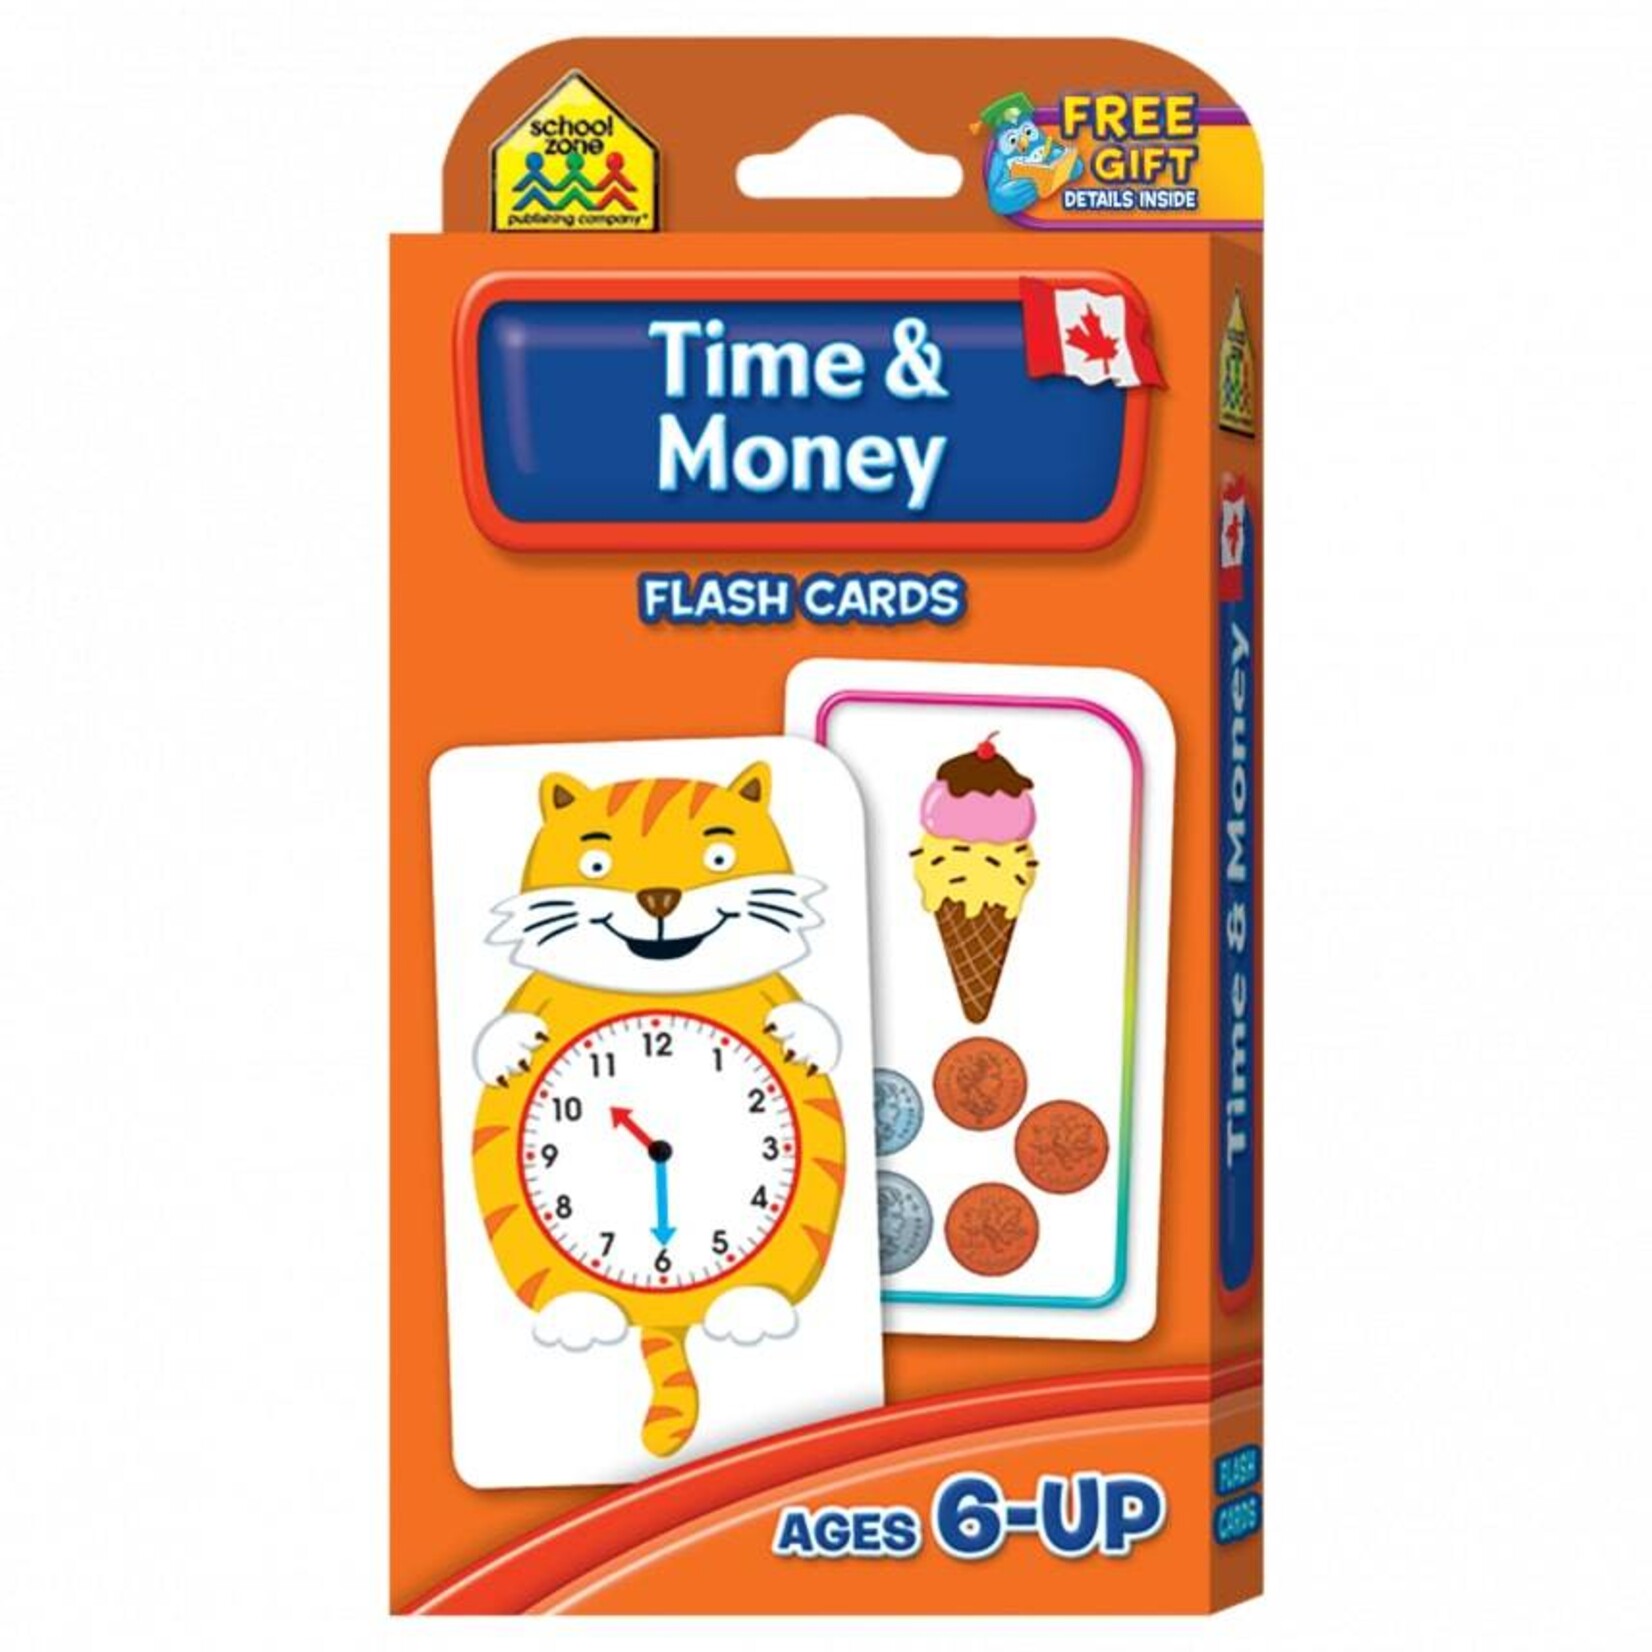 School Zone Publishing Company Canadian Time & Money Flash Cards